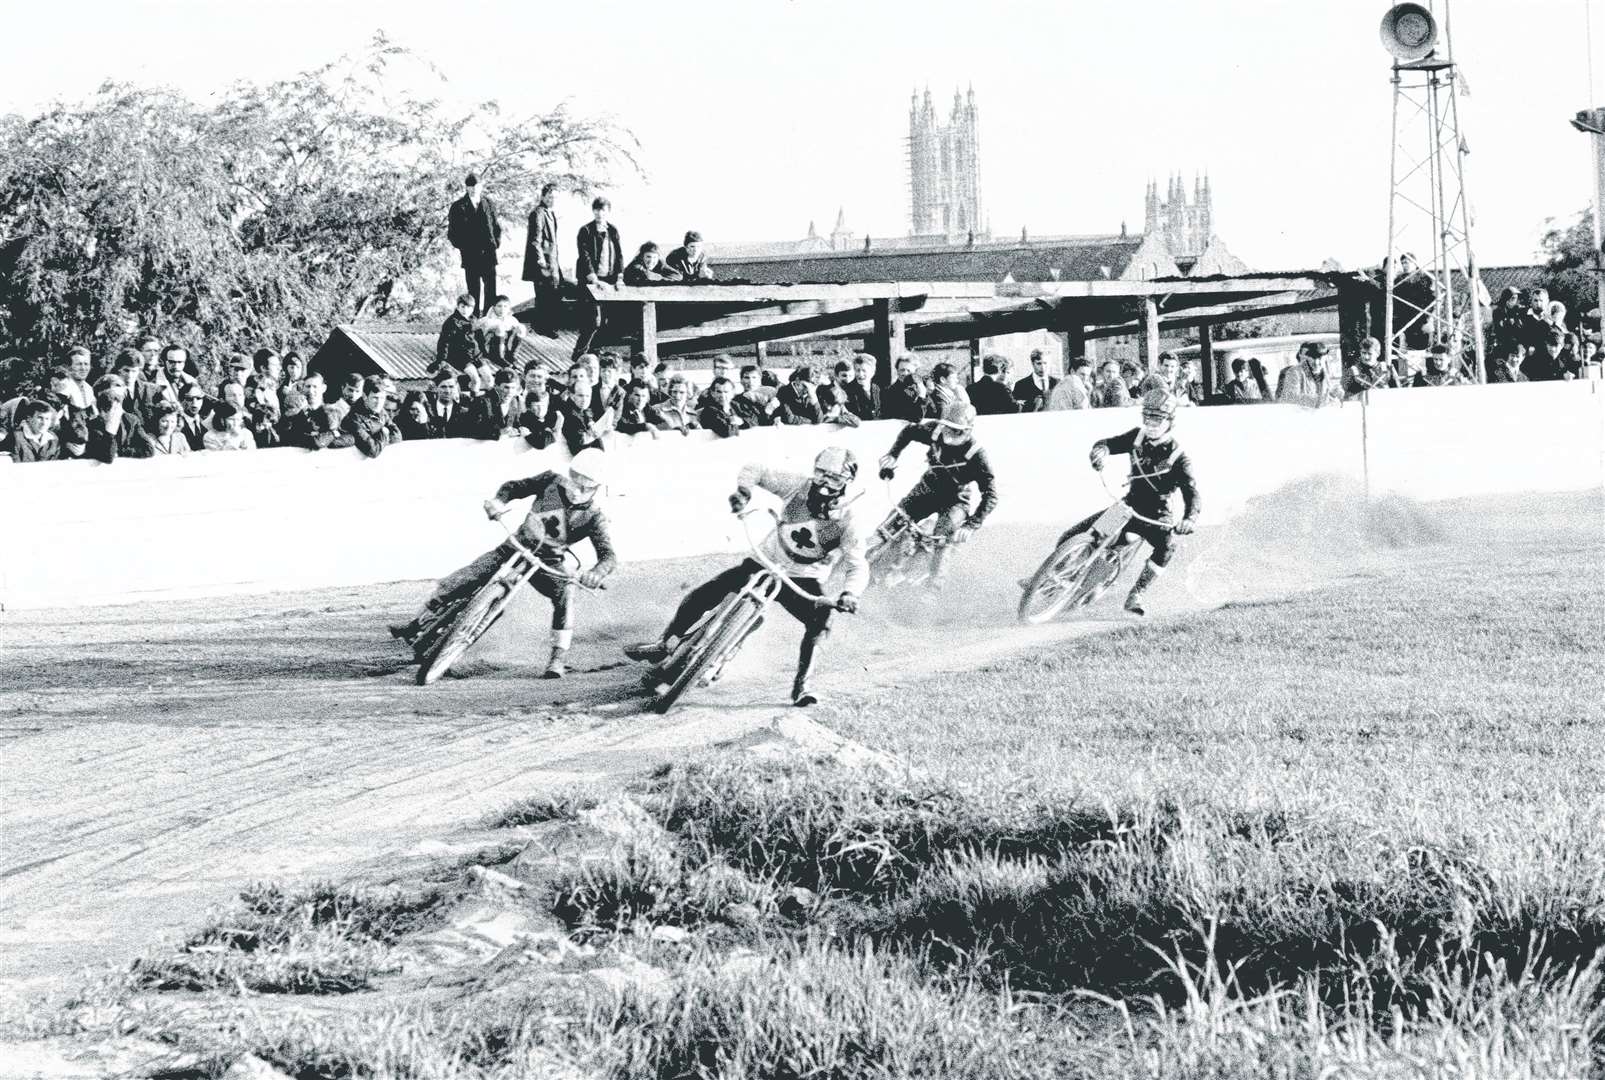 Speedway at Kingsmead stadium in 1968